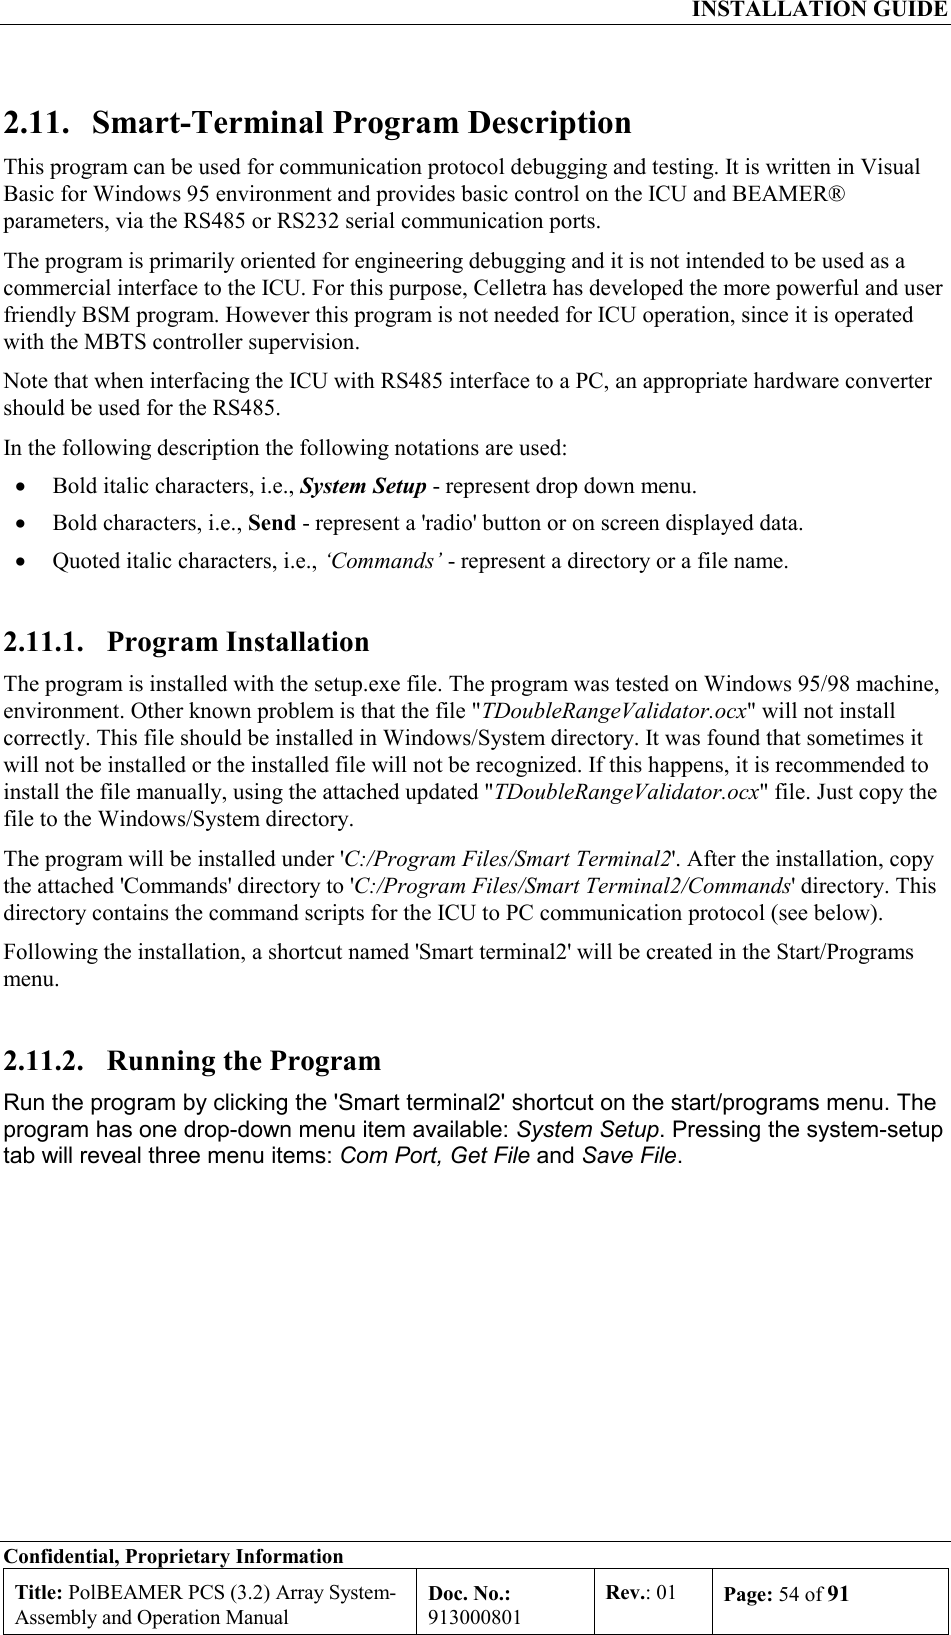  INSTALLATION GUIDE Confidential, Proprietary Information Title: PolBEAMER PCS (3.2) Array System- Assembly and Operation Manual Doc. No.: 913000801 Rev.: 01  Page: 54 of 91  2.11.  Smart-Terminal Program Description This program can be used for communication protocol debugging and testing. It is written in Visual Basic for Windows 95 environment and provides basic control on the ICU and BEAMER®  parameters, via the RS485 or RS232 serial communication ports. The program is primarily oriented for engineering debugging and it is not intended to be used as a commercial interface to the ICU. For this purpose, Celletra has developed the more powerful and user friendly BSM program. However this program is not needed for ICU operation, since it is operated with the MBTS controller supervision. Note that when interfacing the ICU with RS485 interface to a PC, an appropriate hardware converter should be used for the RS485. In the following description the following notations are used: •  Bold italic characters, i.e., System Setup - represent drop down menu. •  Bold characters, i.e., Send - represent a &apos;radio&apos; button or on screen displayed data. •  Quoted italic characters, i.e., ‘Commands’ - represent a directory or a file name. 2.11.1. Program Installation The program is installed with the setup.exe file. The program was tested on Windows 95/98 machine, environment. Other known problem is that the file &quot;TDoubleRangeValidator.ocx&quot; will not install correctly. This file should be installed in Windows/System directory. It was found that sometimes it will not be installed or the installed file will not be recognized. If this happens, it is recommended to install the file manually, using the attached updated &quot;TDoubleRangeValidator.ocx&quot; file. Just copy the file to the Windows/System directory. The program will be installed under &apos;C:/Program Files/Smart Terminal2&apos;. After the installation, copy the attached &apos;Commands&apos; directory to &apos;C:/Program Files/Smart Terminal2/Commands&apos; directory. This directory contains the command scripts for the ICU to PC communication protocol (see below). Following the installation, a shortcut named &apos;Smart terminal2&apos; will be created in the Start/Programs menu.  2.11.2.  Running the Program Run the program by clicking the &apos;Smart terminal2&apos; shortcut on the start/programs menu. The program has one drop-down menu item available: System Setup. Pressing the system-setup tab will reveal three menu items: Com Port, Get File and Save File. 